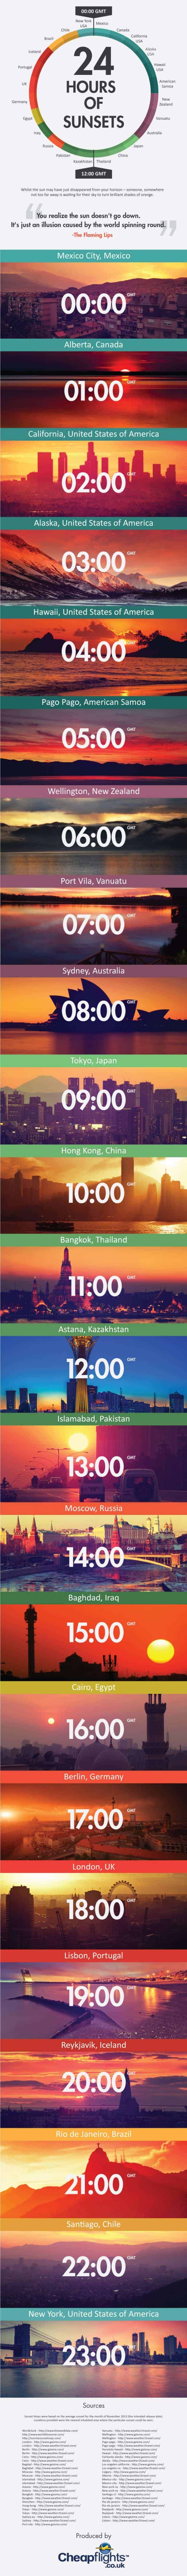 24 Hours of Sunsets Infographic